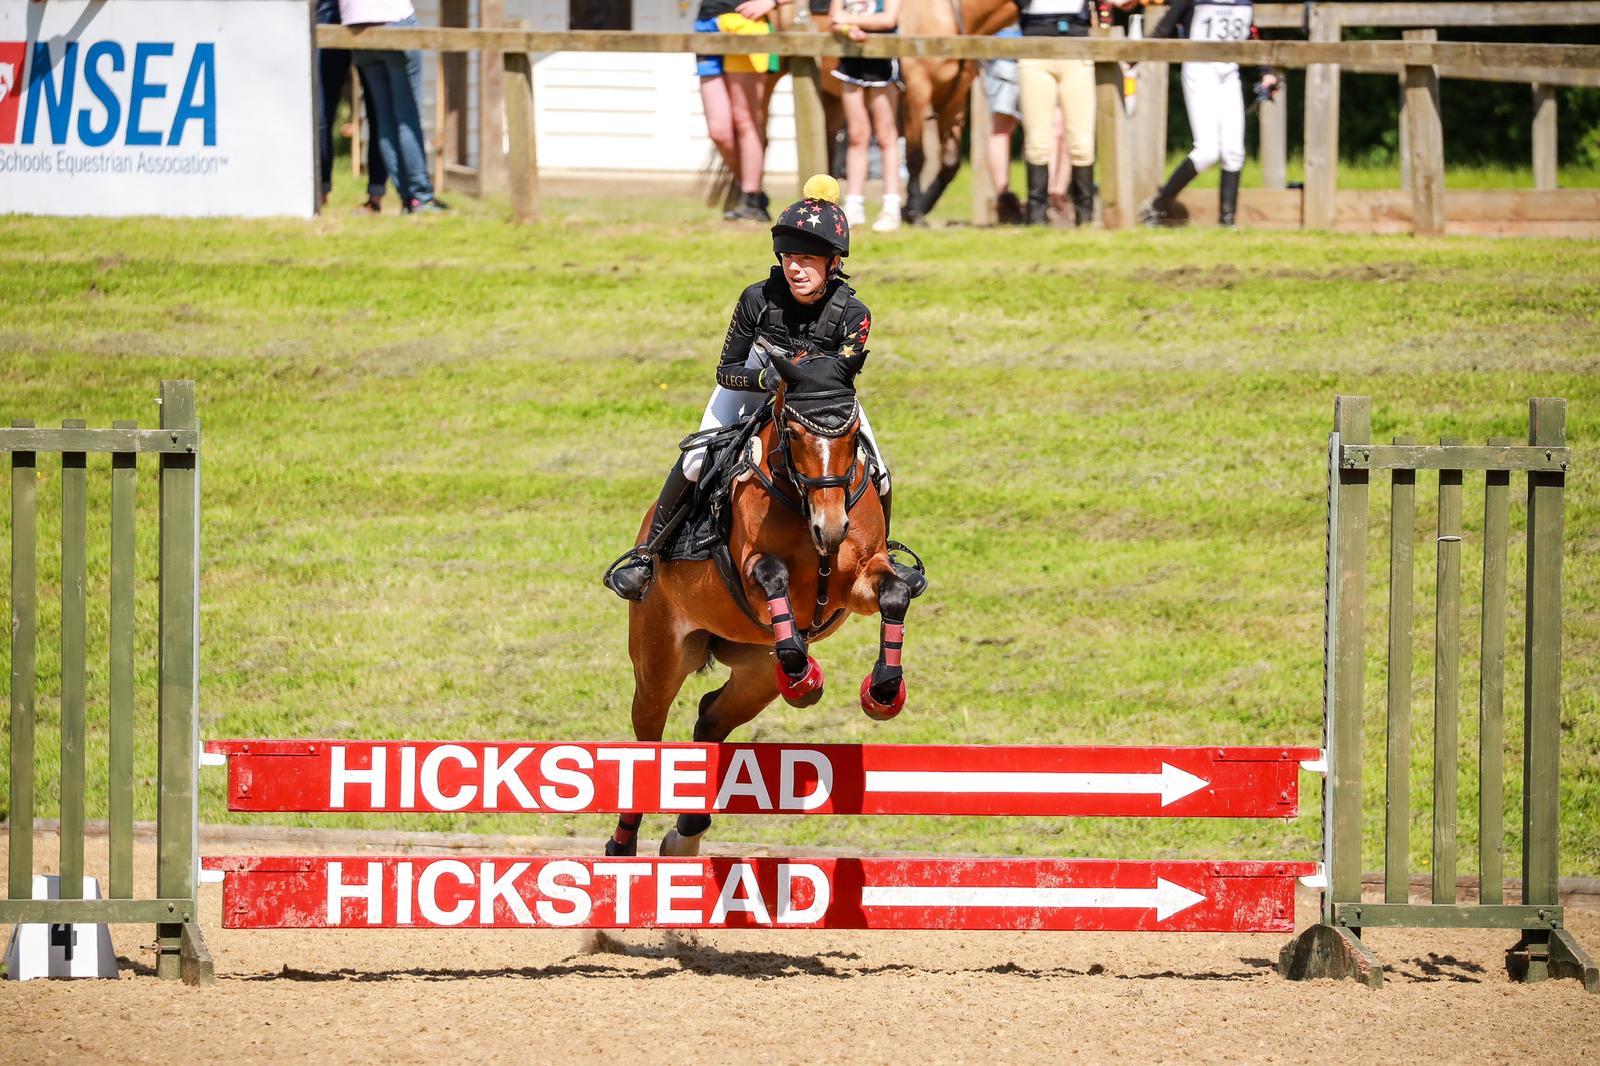 Unstoppable Equestrian Team compete at the NSEA Finals at Hickstead